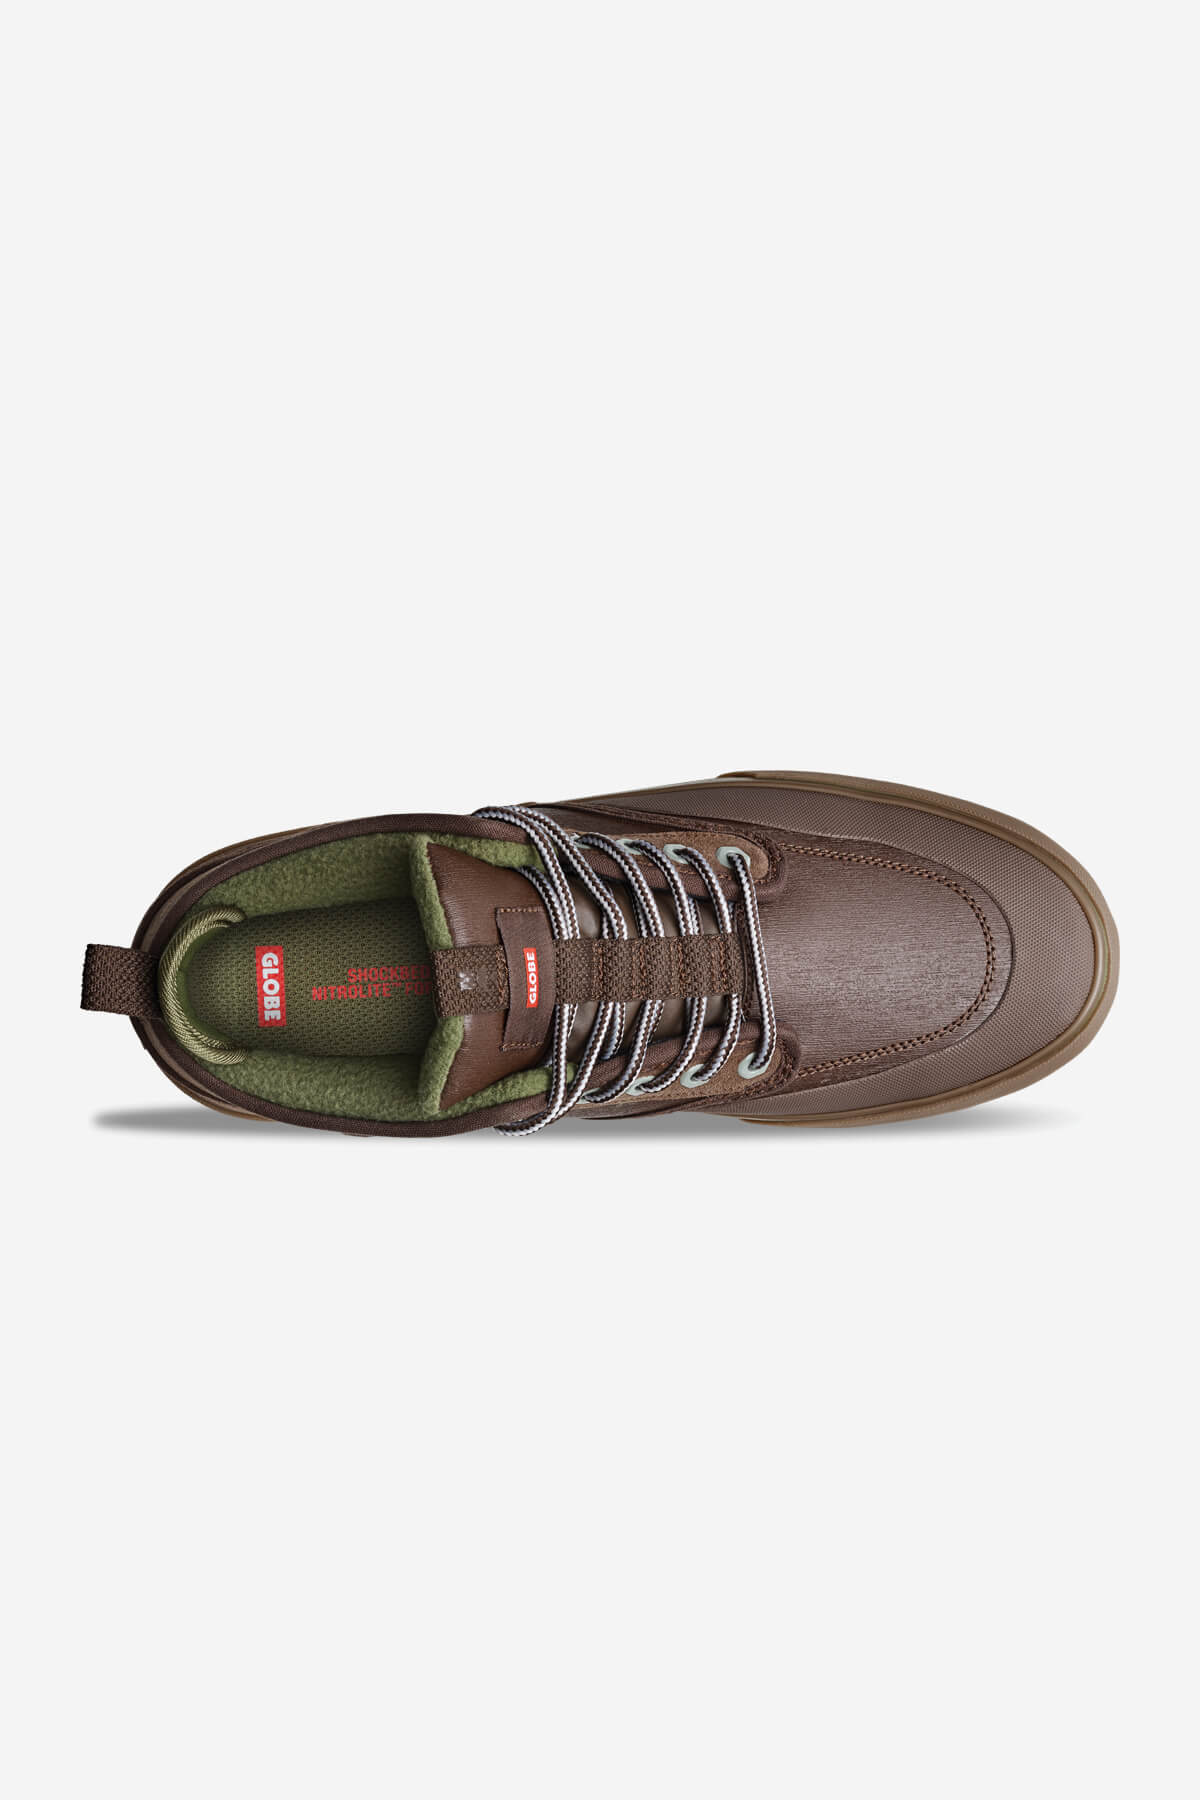 Globe Mid shoes Motley Mid skate shoes in Chestnut/Olive/Summit